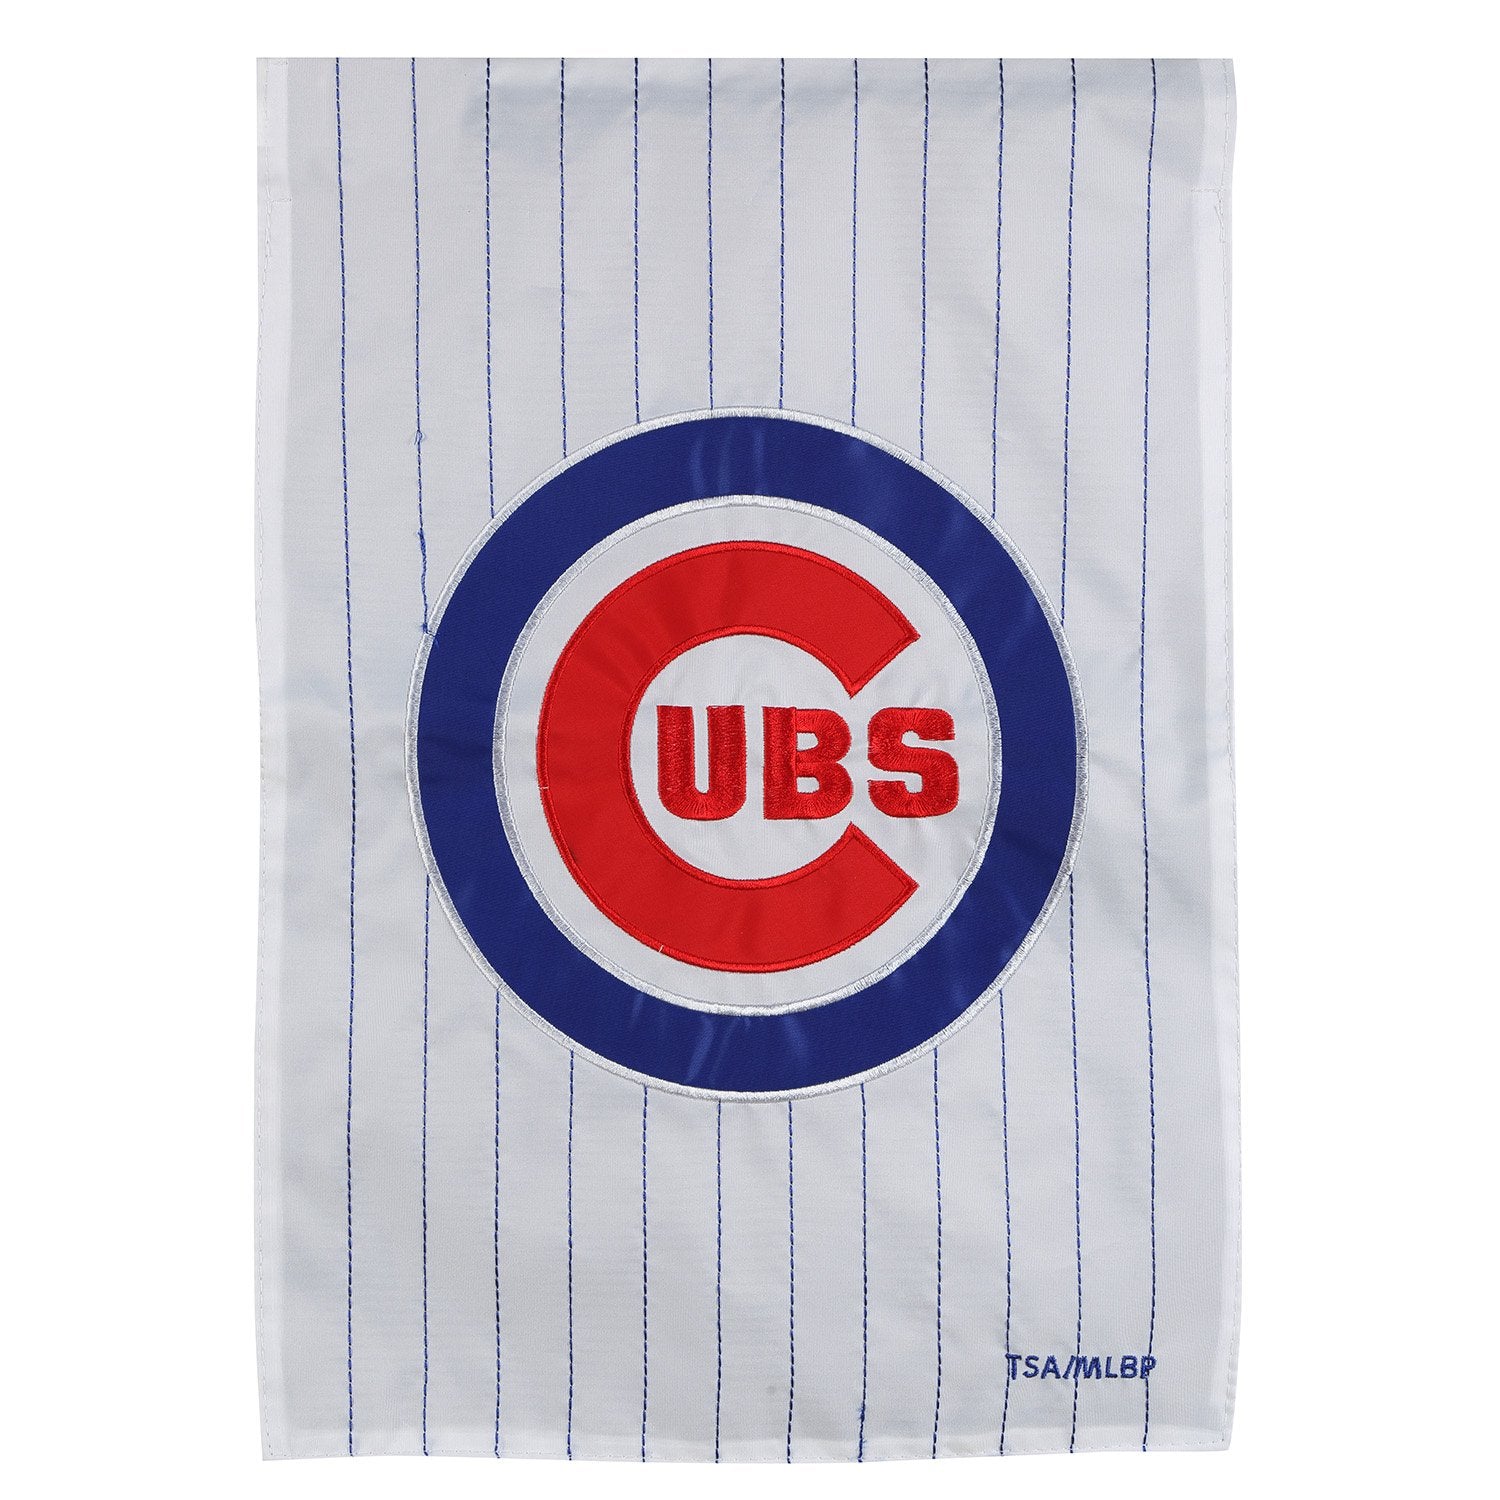 Chicago Cubs Premium 2-sided Garden Flag Banner, Applique, 13x18 Inch, Outdoor Use